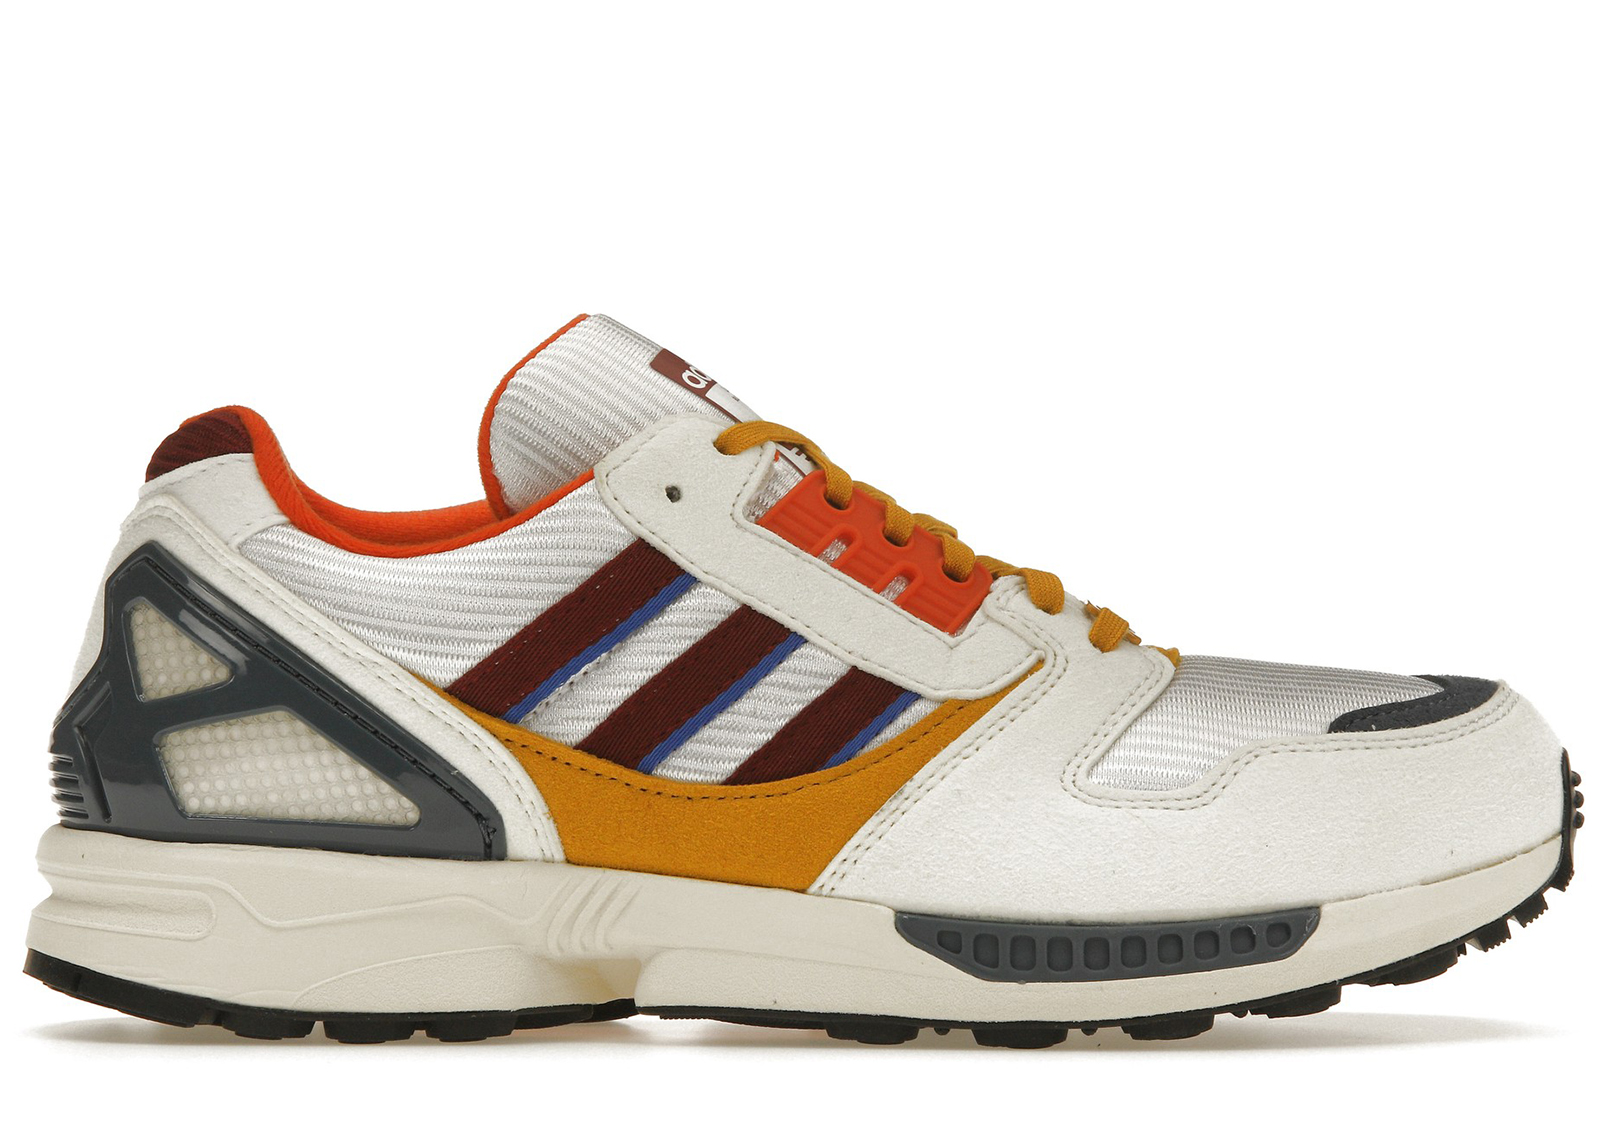 adidas ZX 8000 Olympic (2020) Men's - FX9152 - US